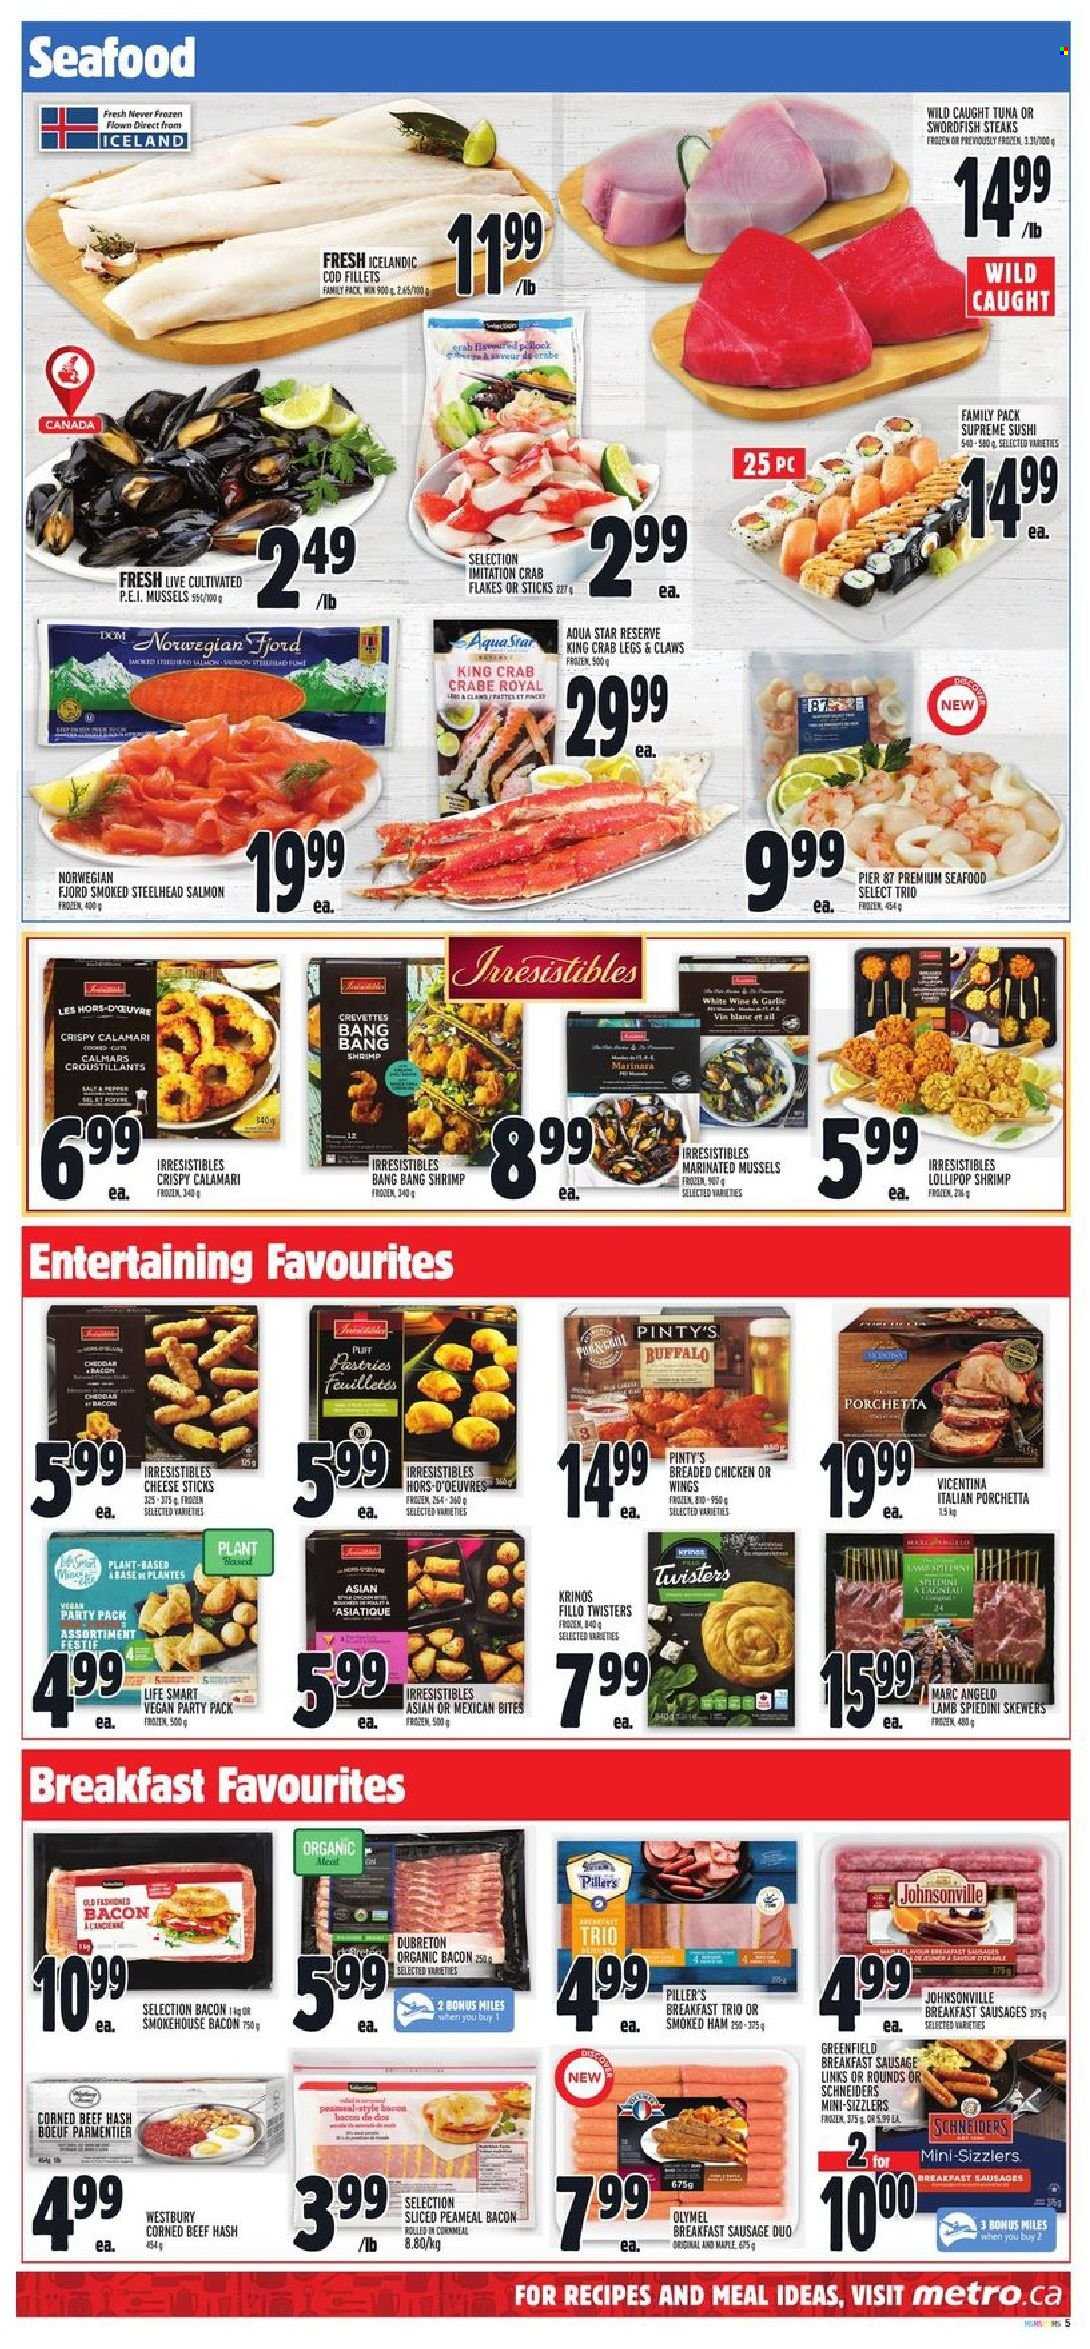 thumbnail - Metro Flyer - October 07, 2021 - October 13, 2021 - Sales products - calamari, cod, mussels, salmon, swordfish, tuna, king crab, seafood, crab legs, crab, shrimps, beef hash, bacon, ham, smoked ham, Johnsonville, sausage, corned beef, cheese, cheese sticks, lollipop, white wine, wine, beef meat, steak. Page 5.